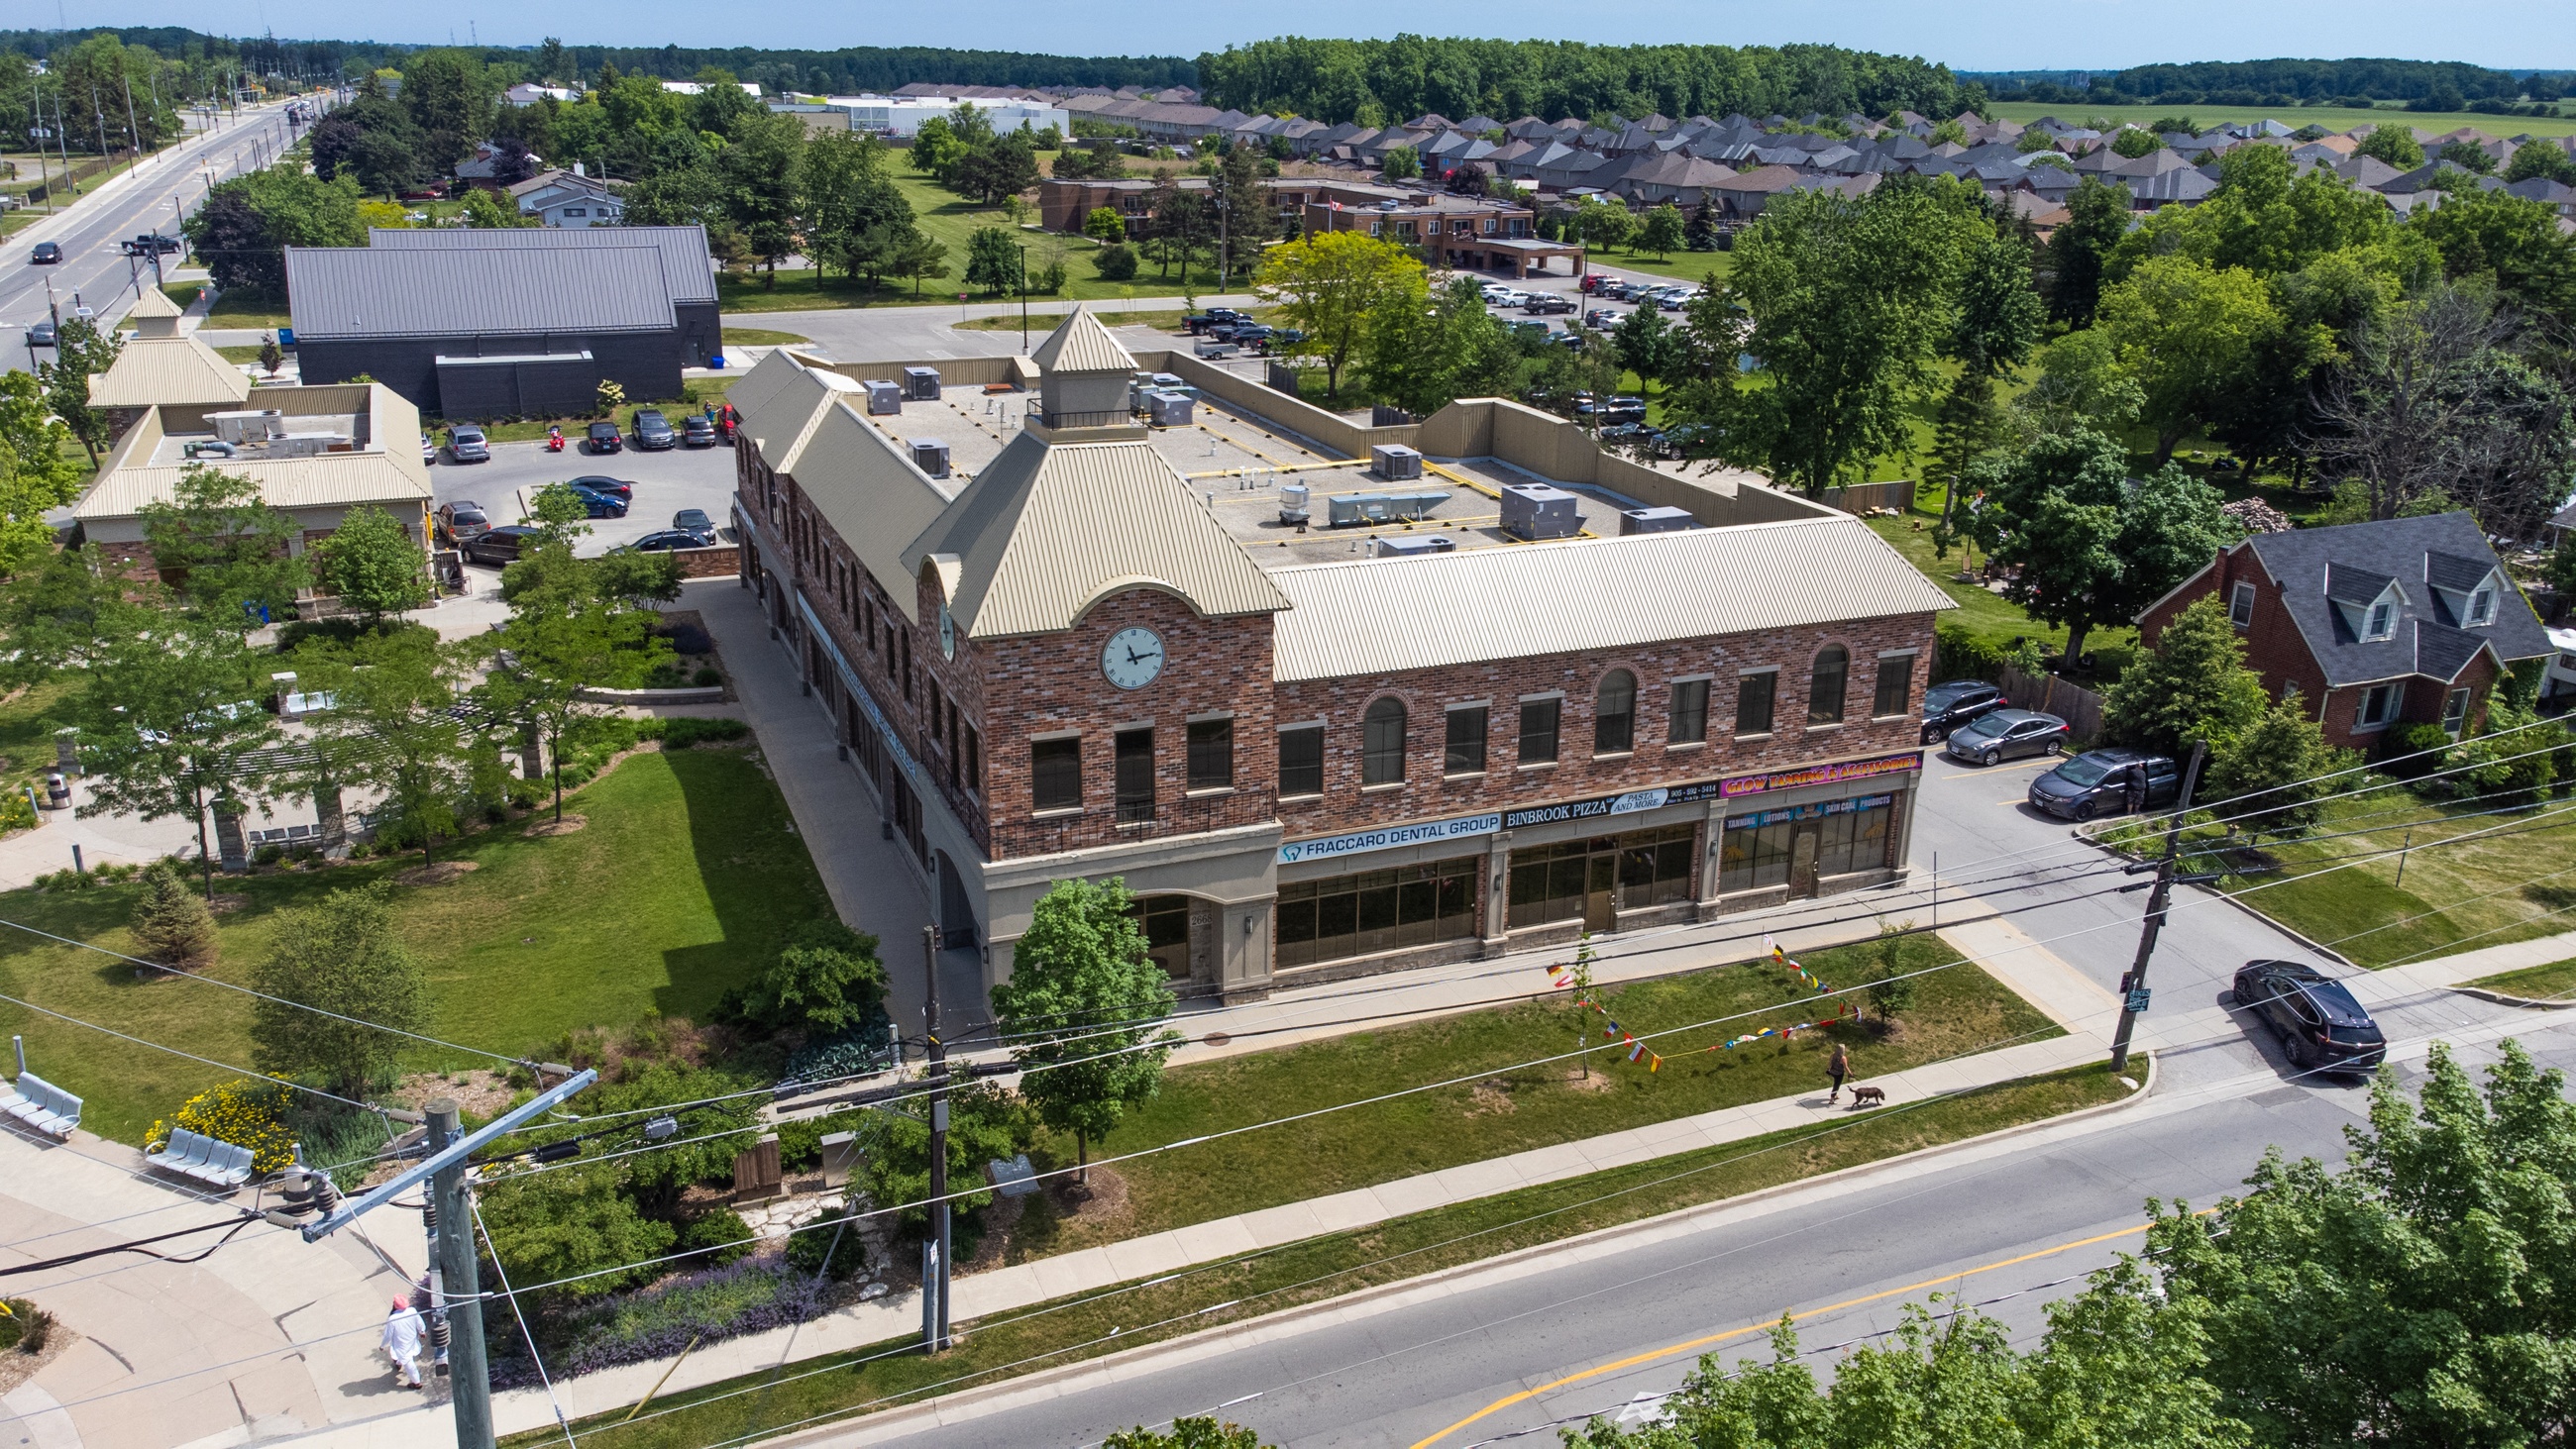 Aerial view of commercial building